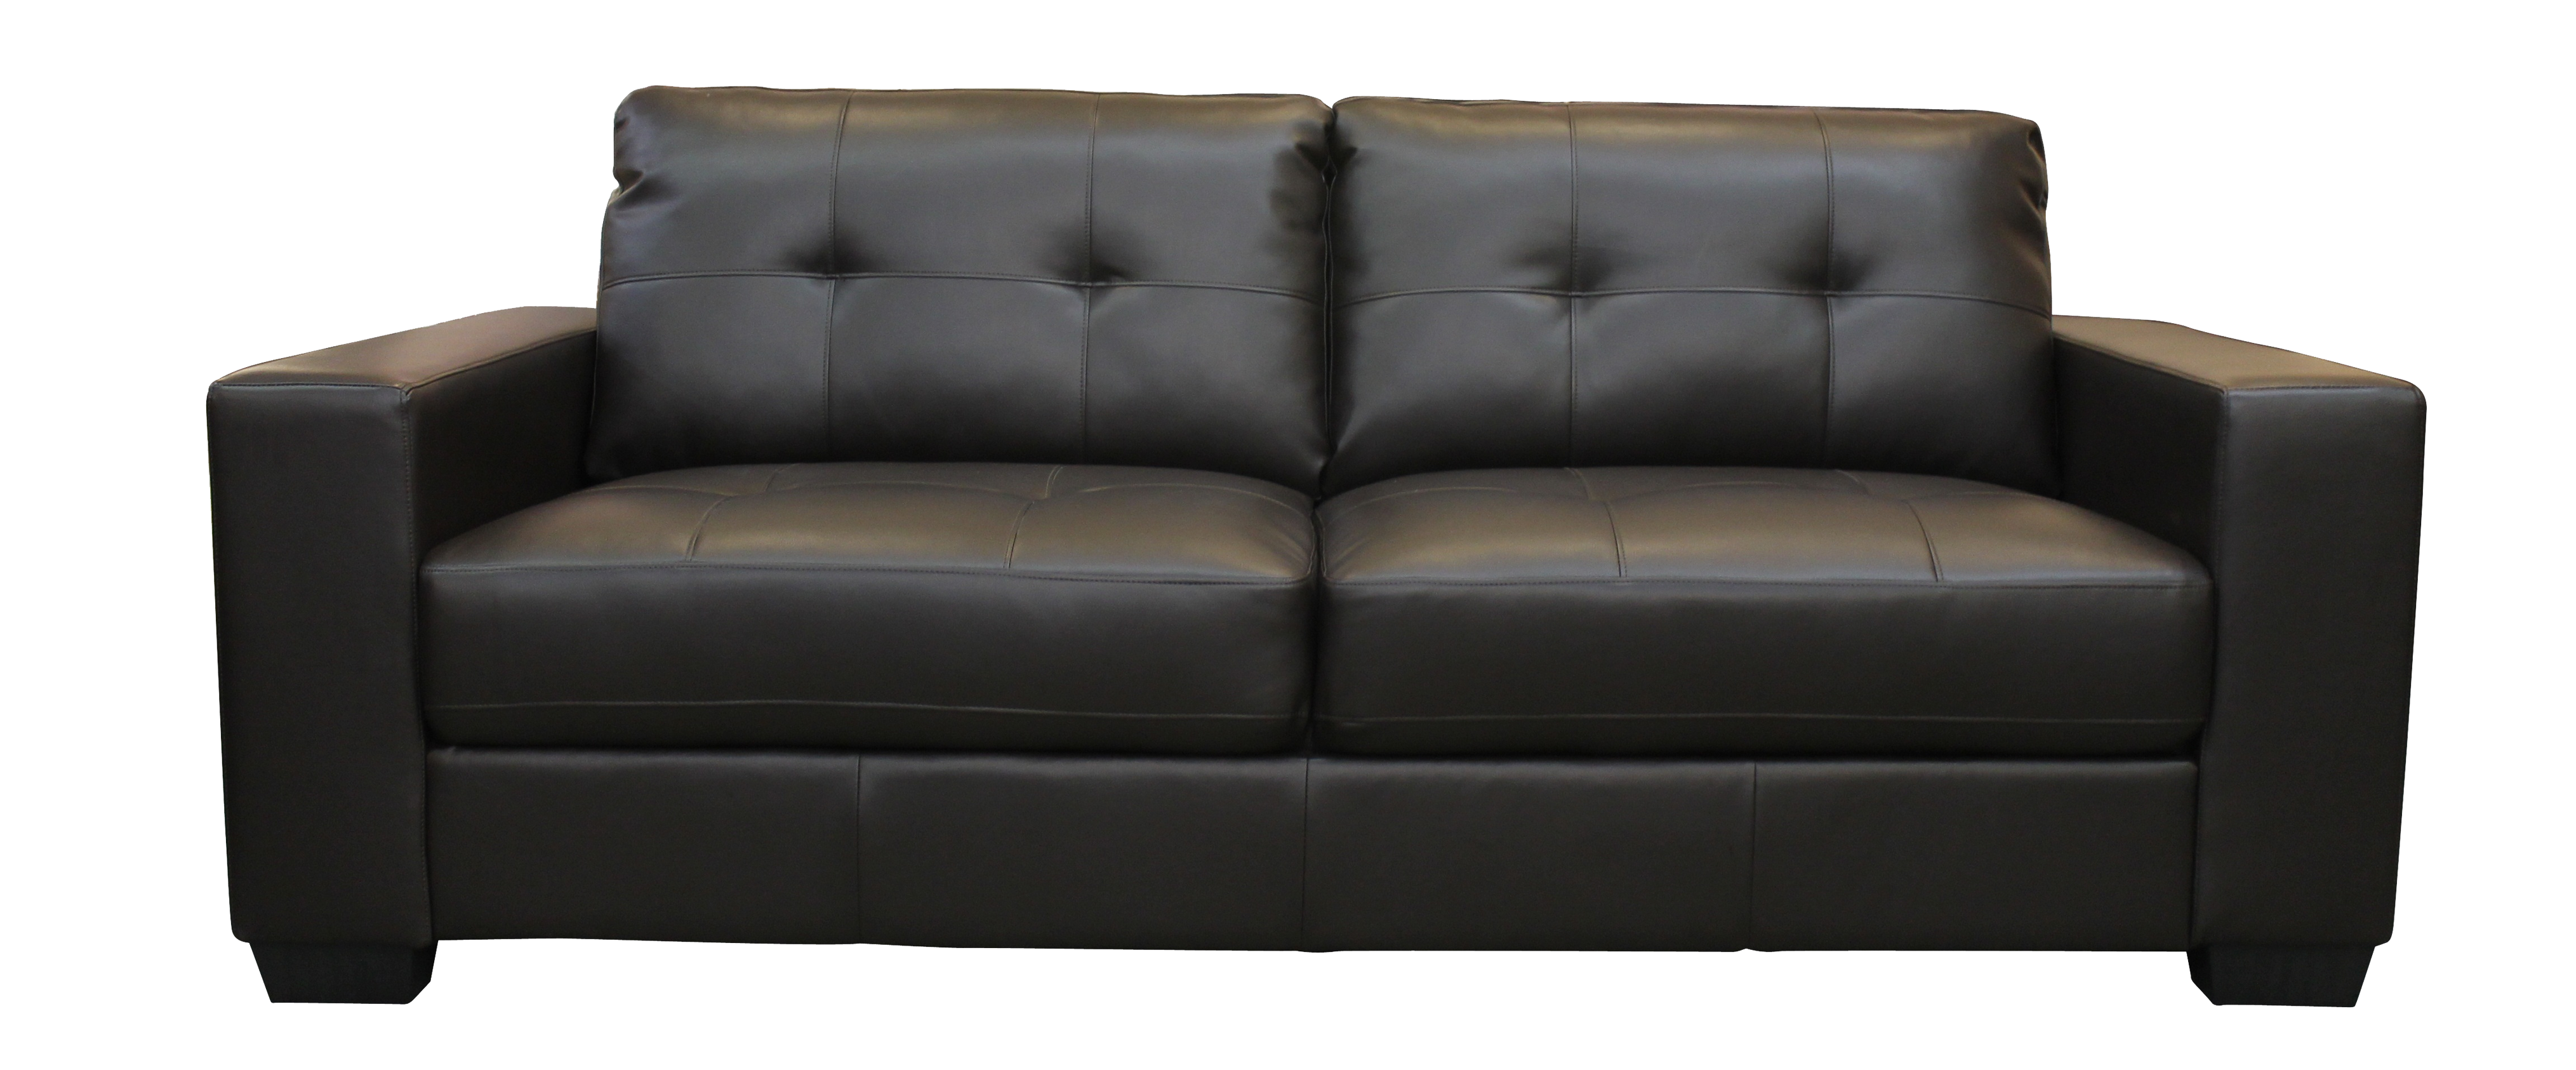 Sofa PNG Image in High Definition pngteam.com